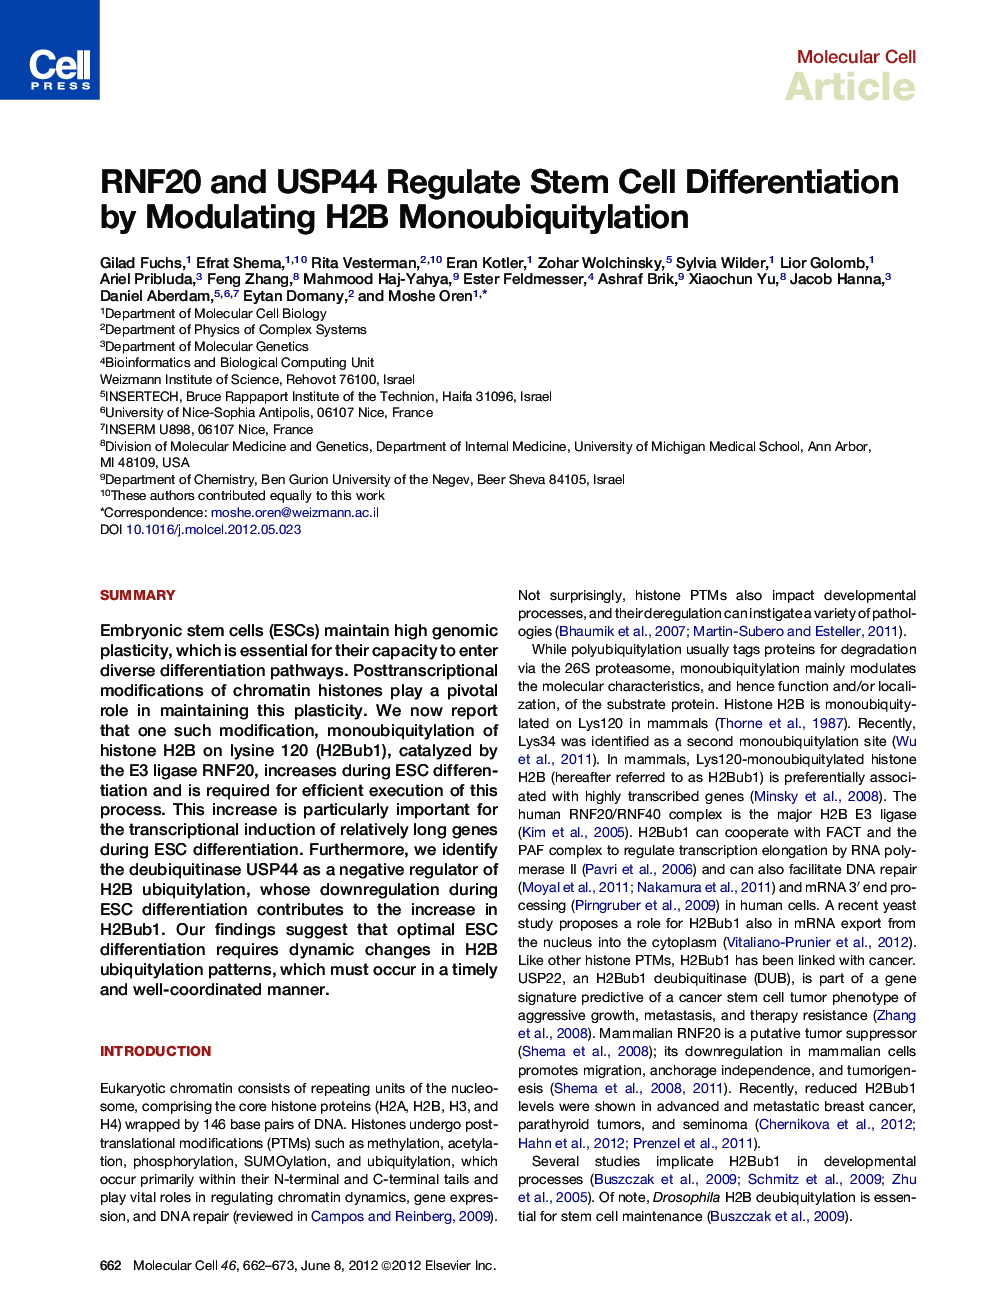 RNF20 and USP44 Regulate Stem Cell Differentiation by Modulating H2B Monoubiquitylation